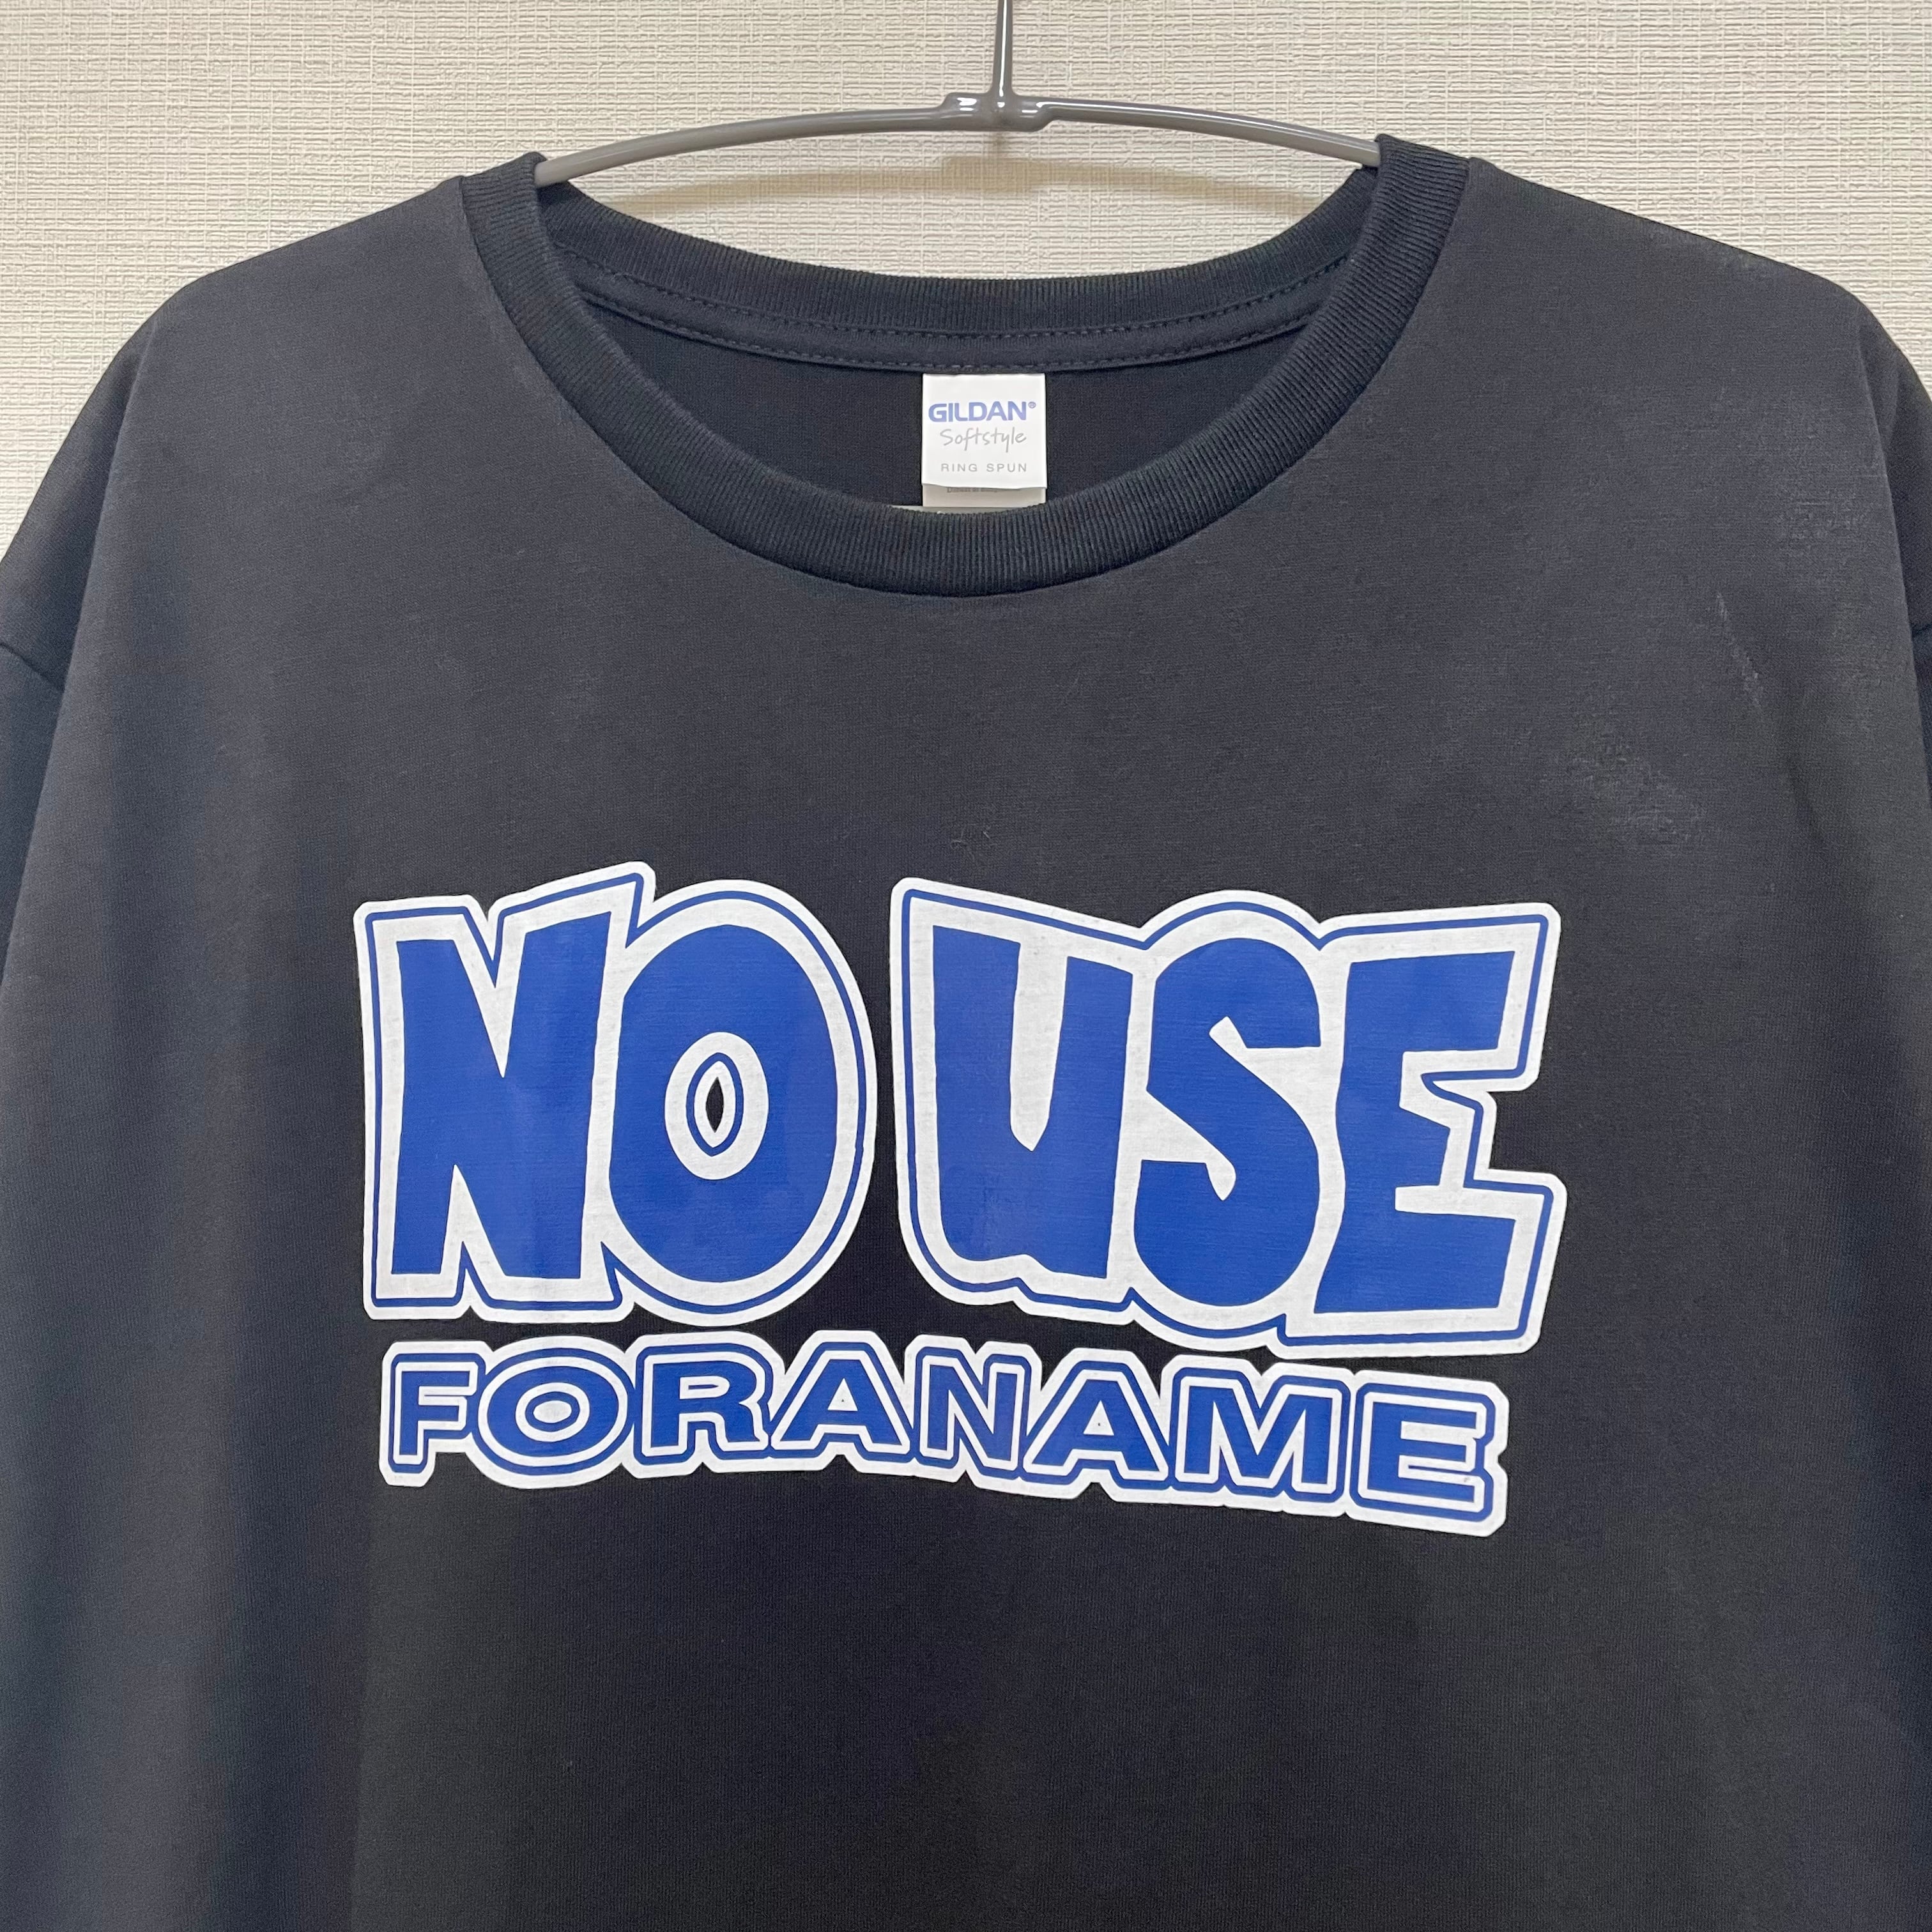 NO USE FOR A NAME バンドTシャツ